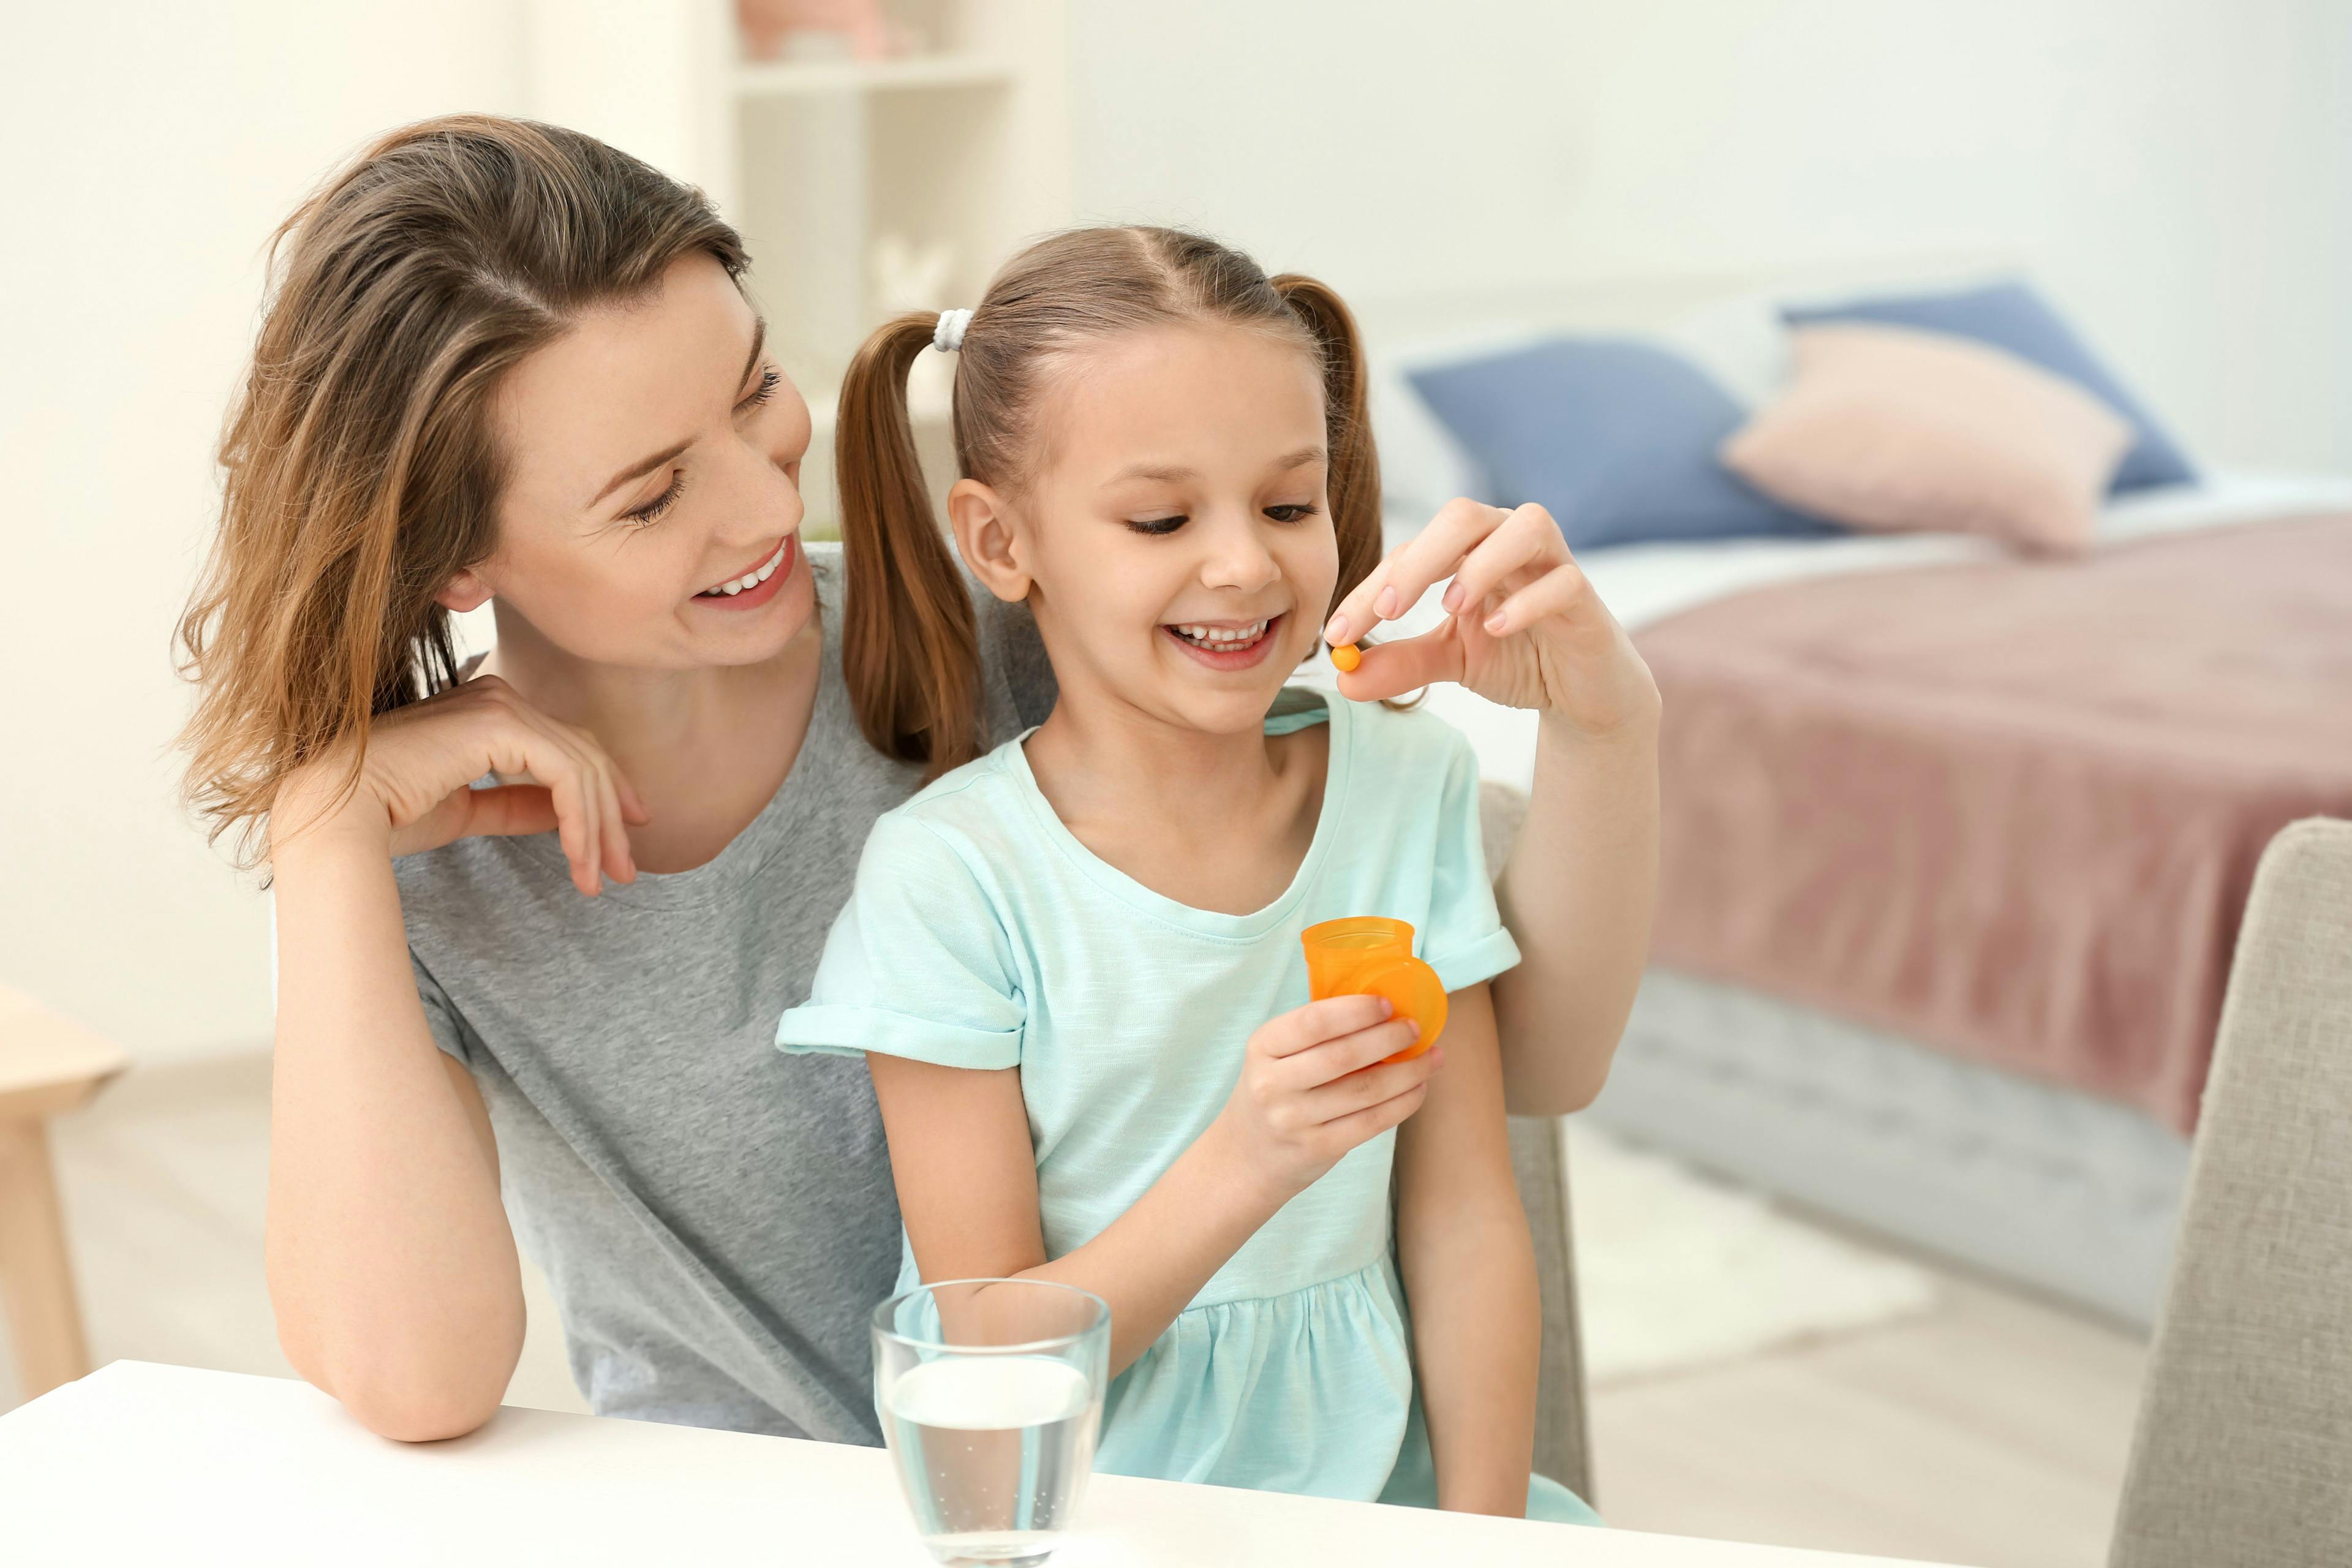 Ingredient innovation is on the rise for children and infant nutrition products, dietary supplements